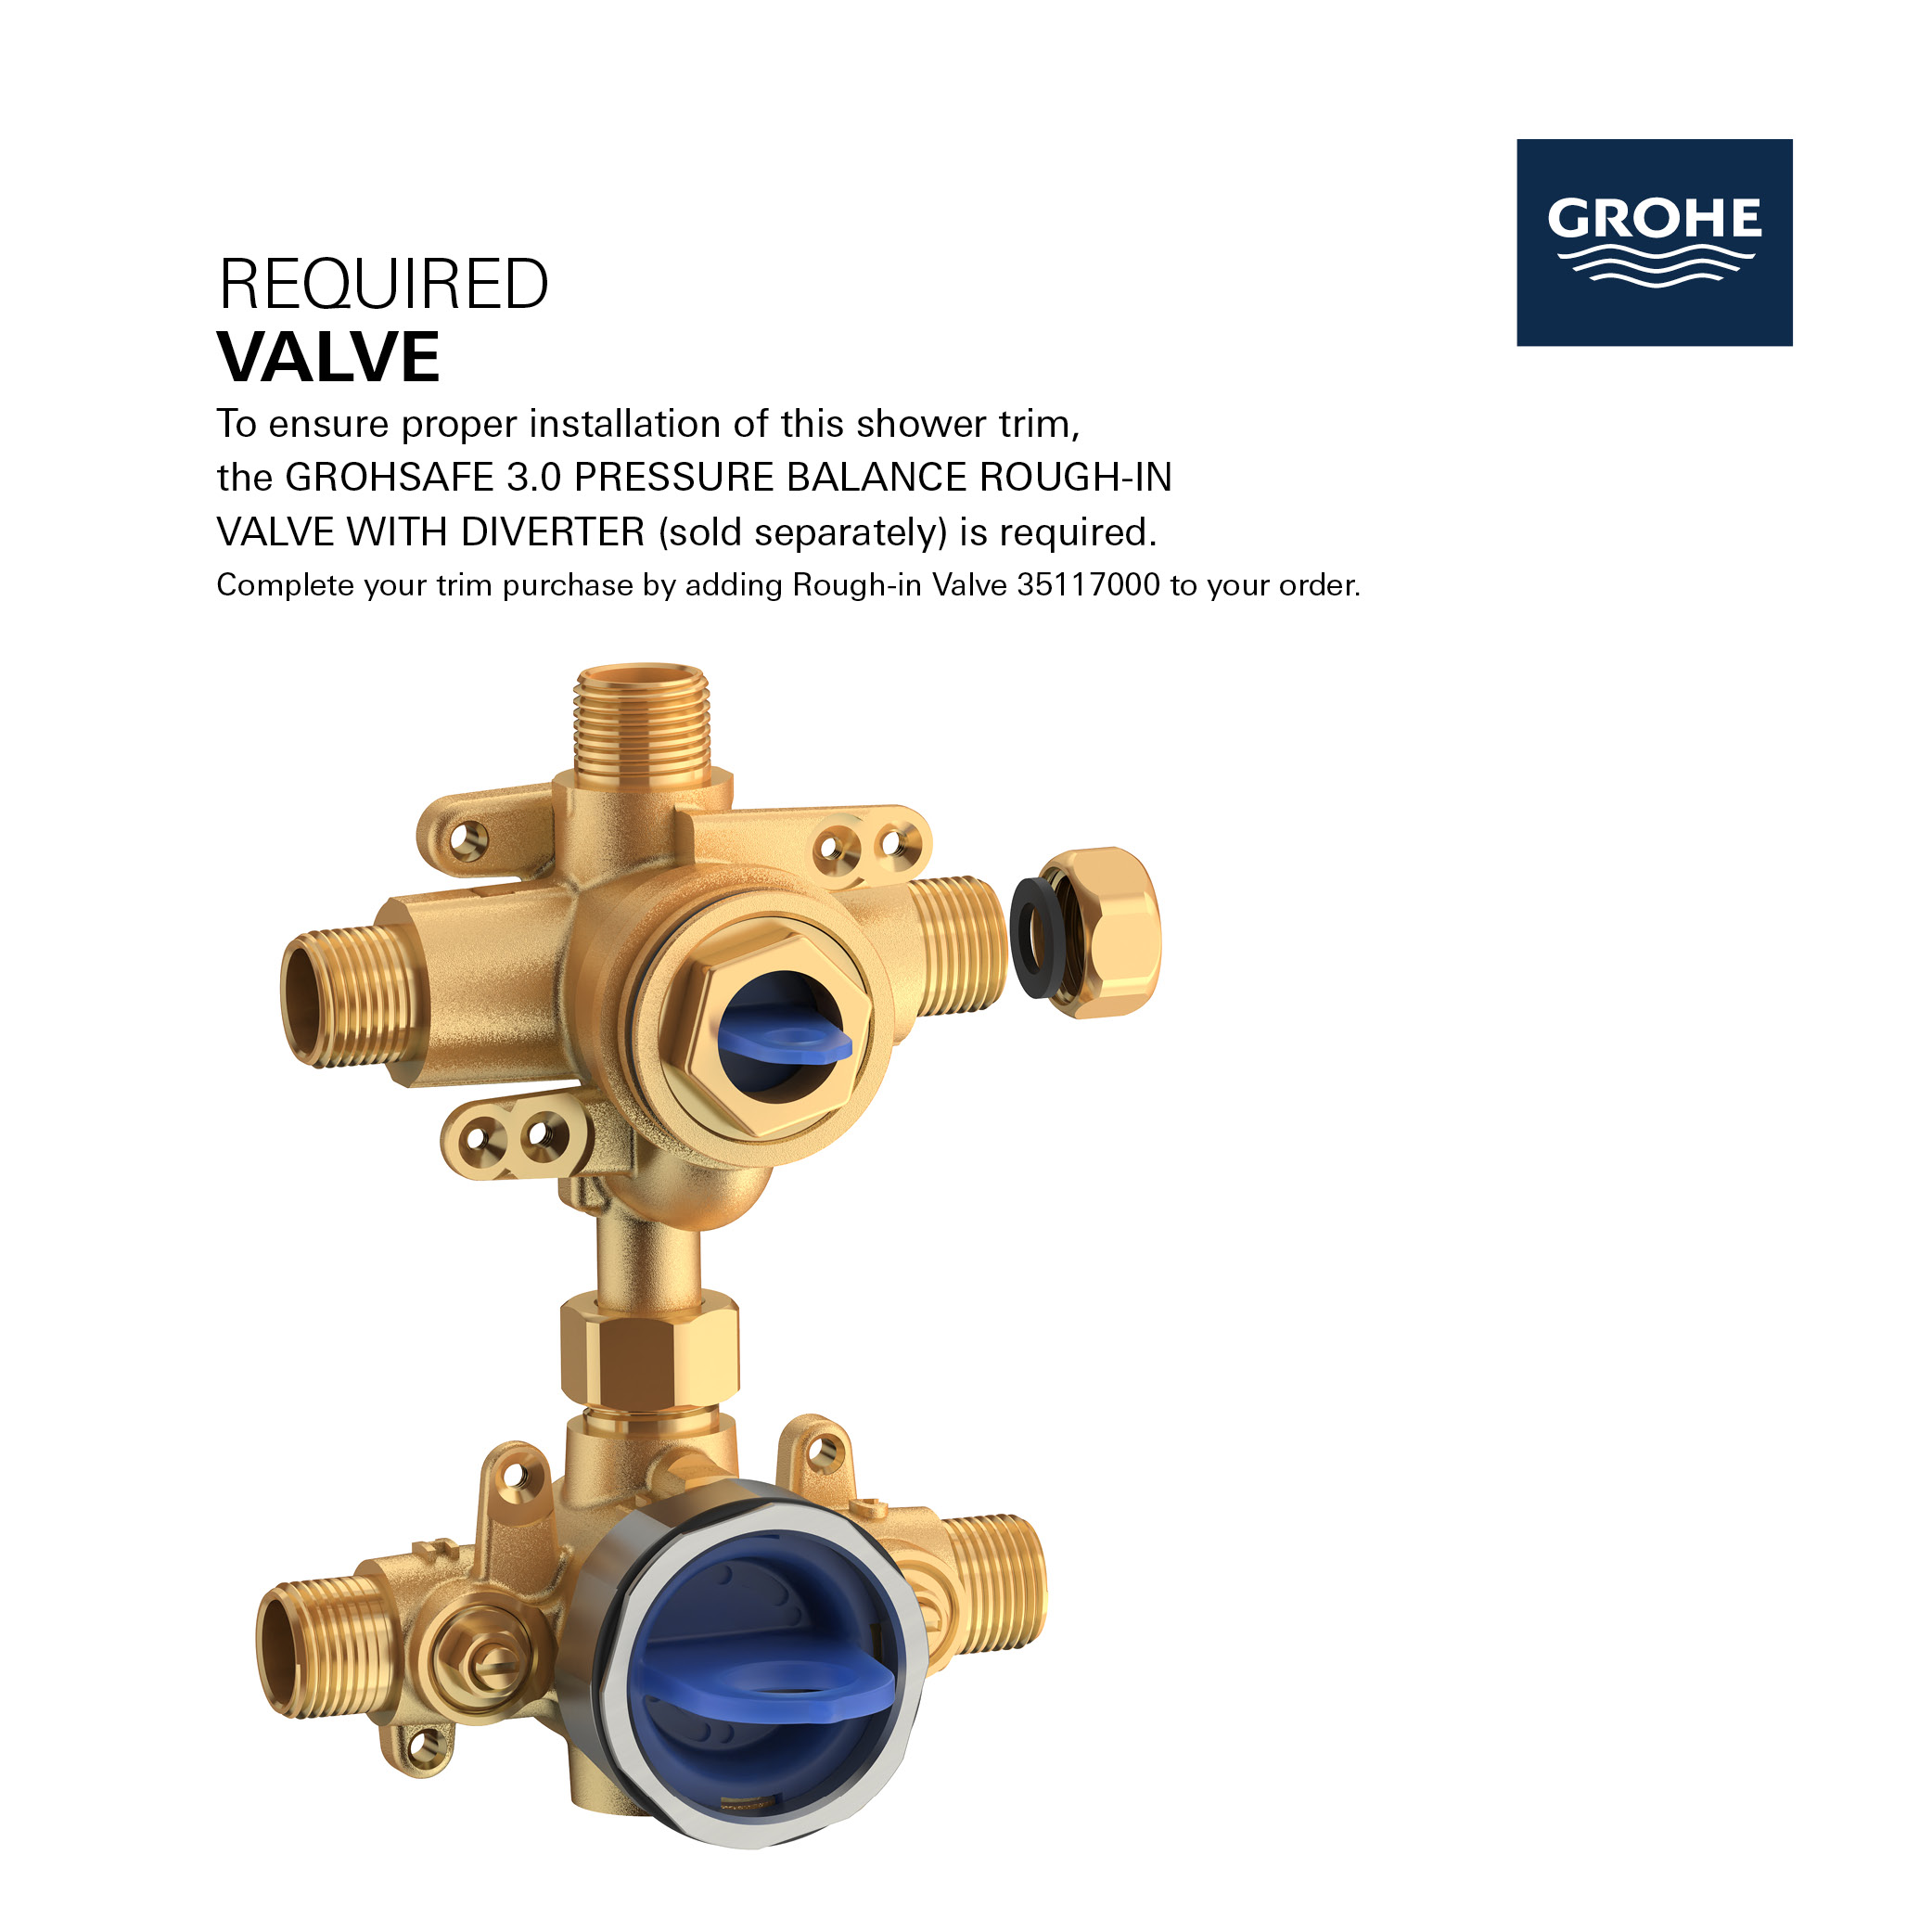 LINEARE PRESSURE BALANCE VALVE TRIM WITH 3-WAY DIVERTER WITH CARTRIDGE